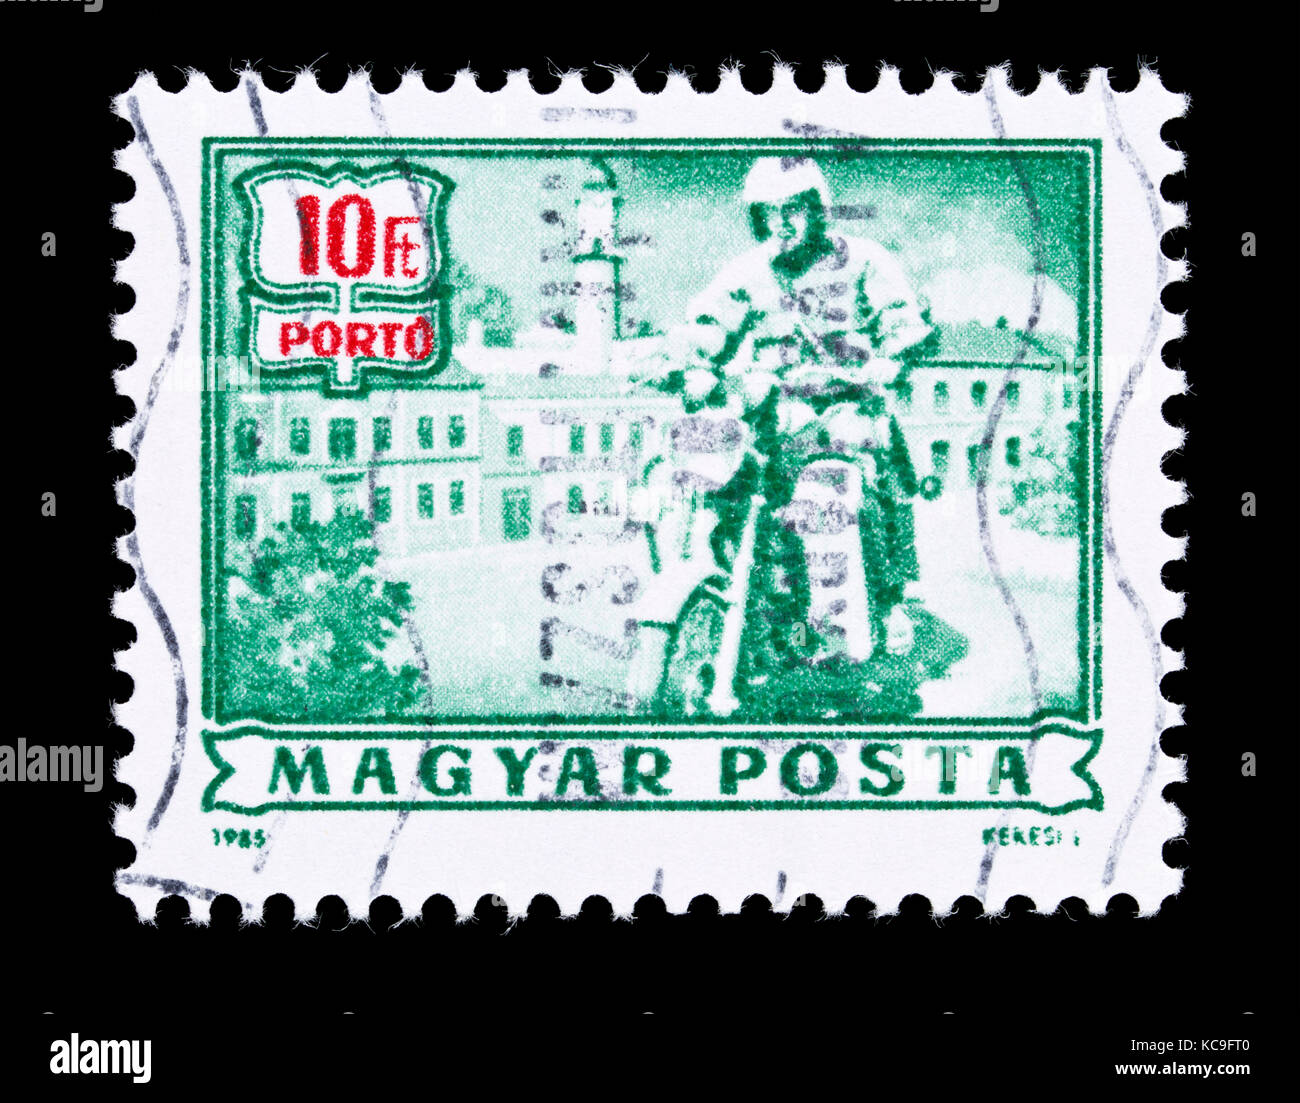 Postage due stamp from Hungary depicting a mailman riding a motorcycle. Stock Photo